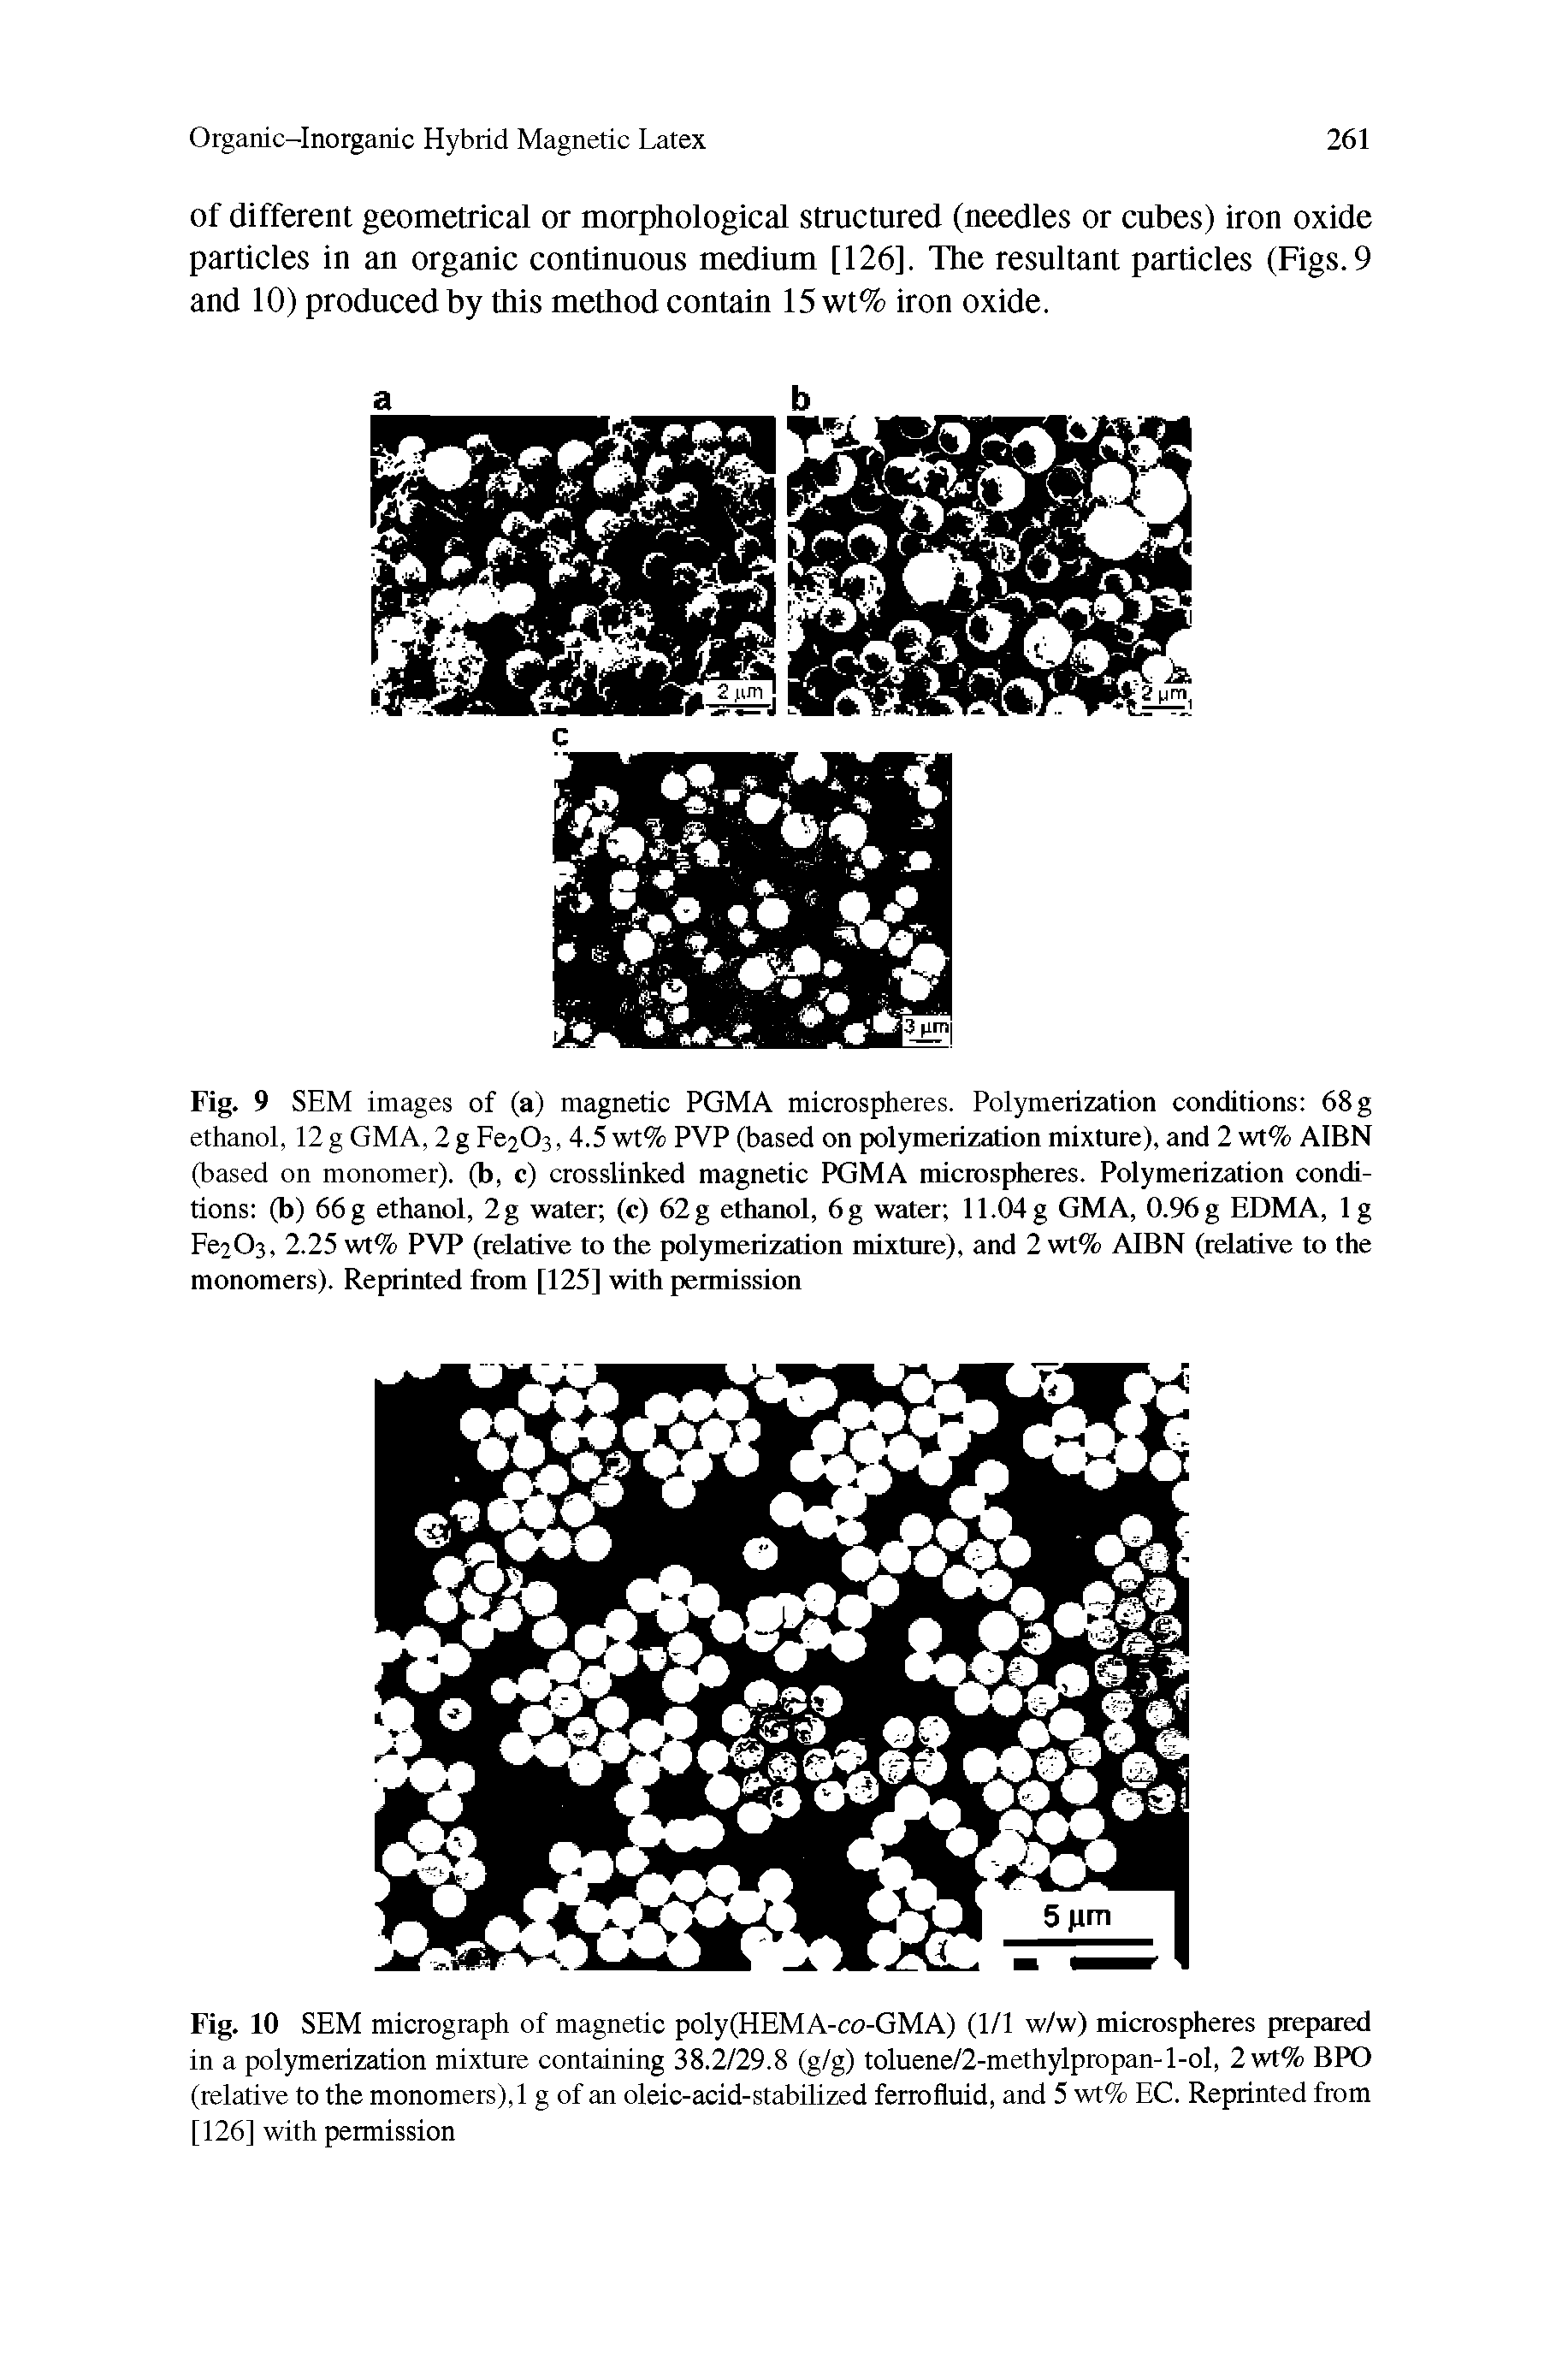 Fig. 9 SEM images of (a) magnetic PGMA microspheres. Polymerization conditions 68 g ethanol, 12 g GMA, 2 g Fe203, 4.5 wt% PVP (based on polymerization mixture), and 2 wt% AIBN (based on monomer), (b, c) crosslinked magnetic PGMA nuciospheres. Polymerization conditions (b) 66 g ethanol, 2g water (c) 62 g ethanol, 6g water 11.04g GMA, 0.96 g EDMA, Ig Fe203, 2.25 wt% PVP (relative to the polymerization mixture), and 2 wt% AIBN (relative to the monomers). Reprinted from [125] with permission...